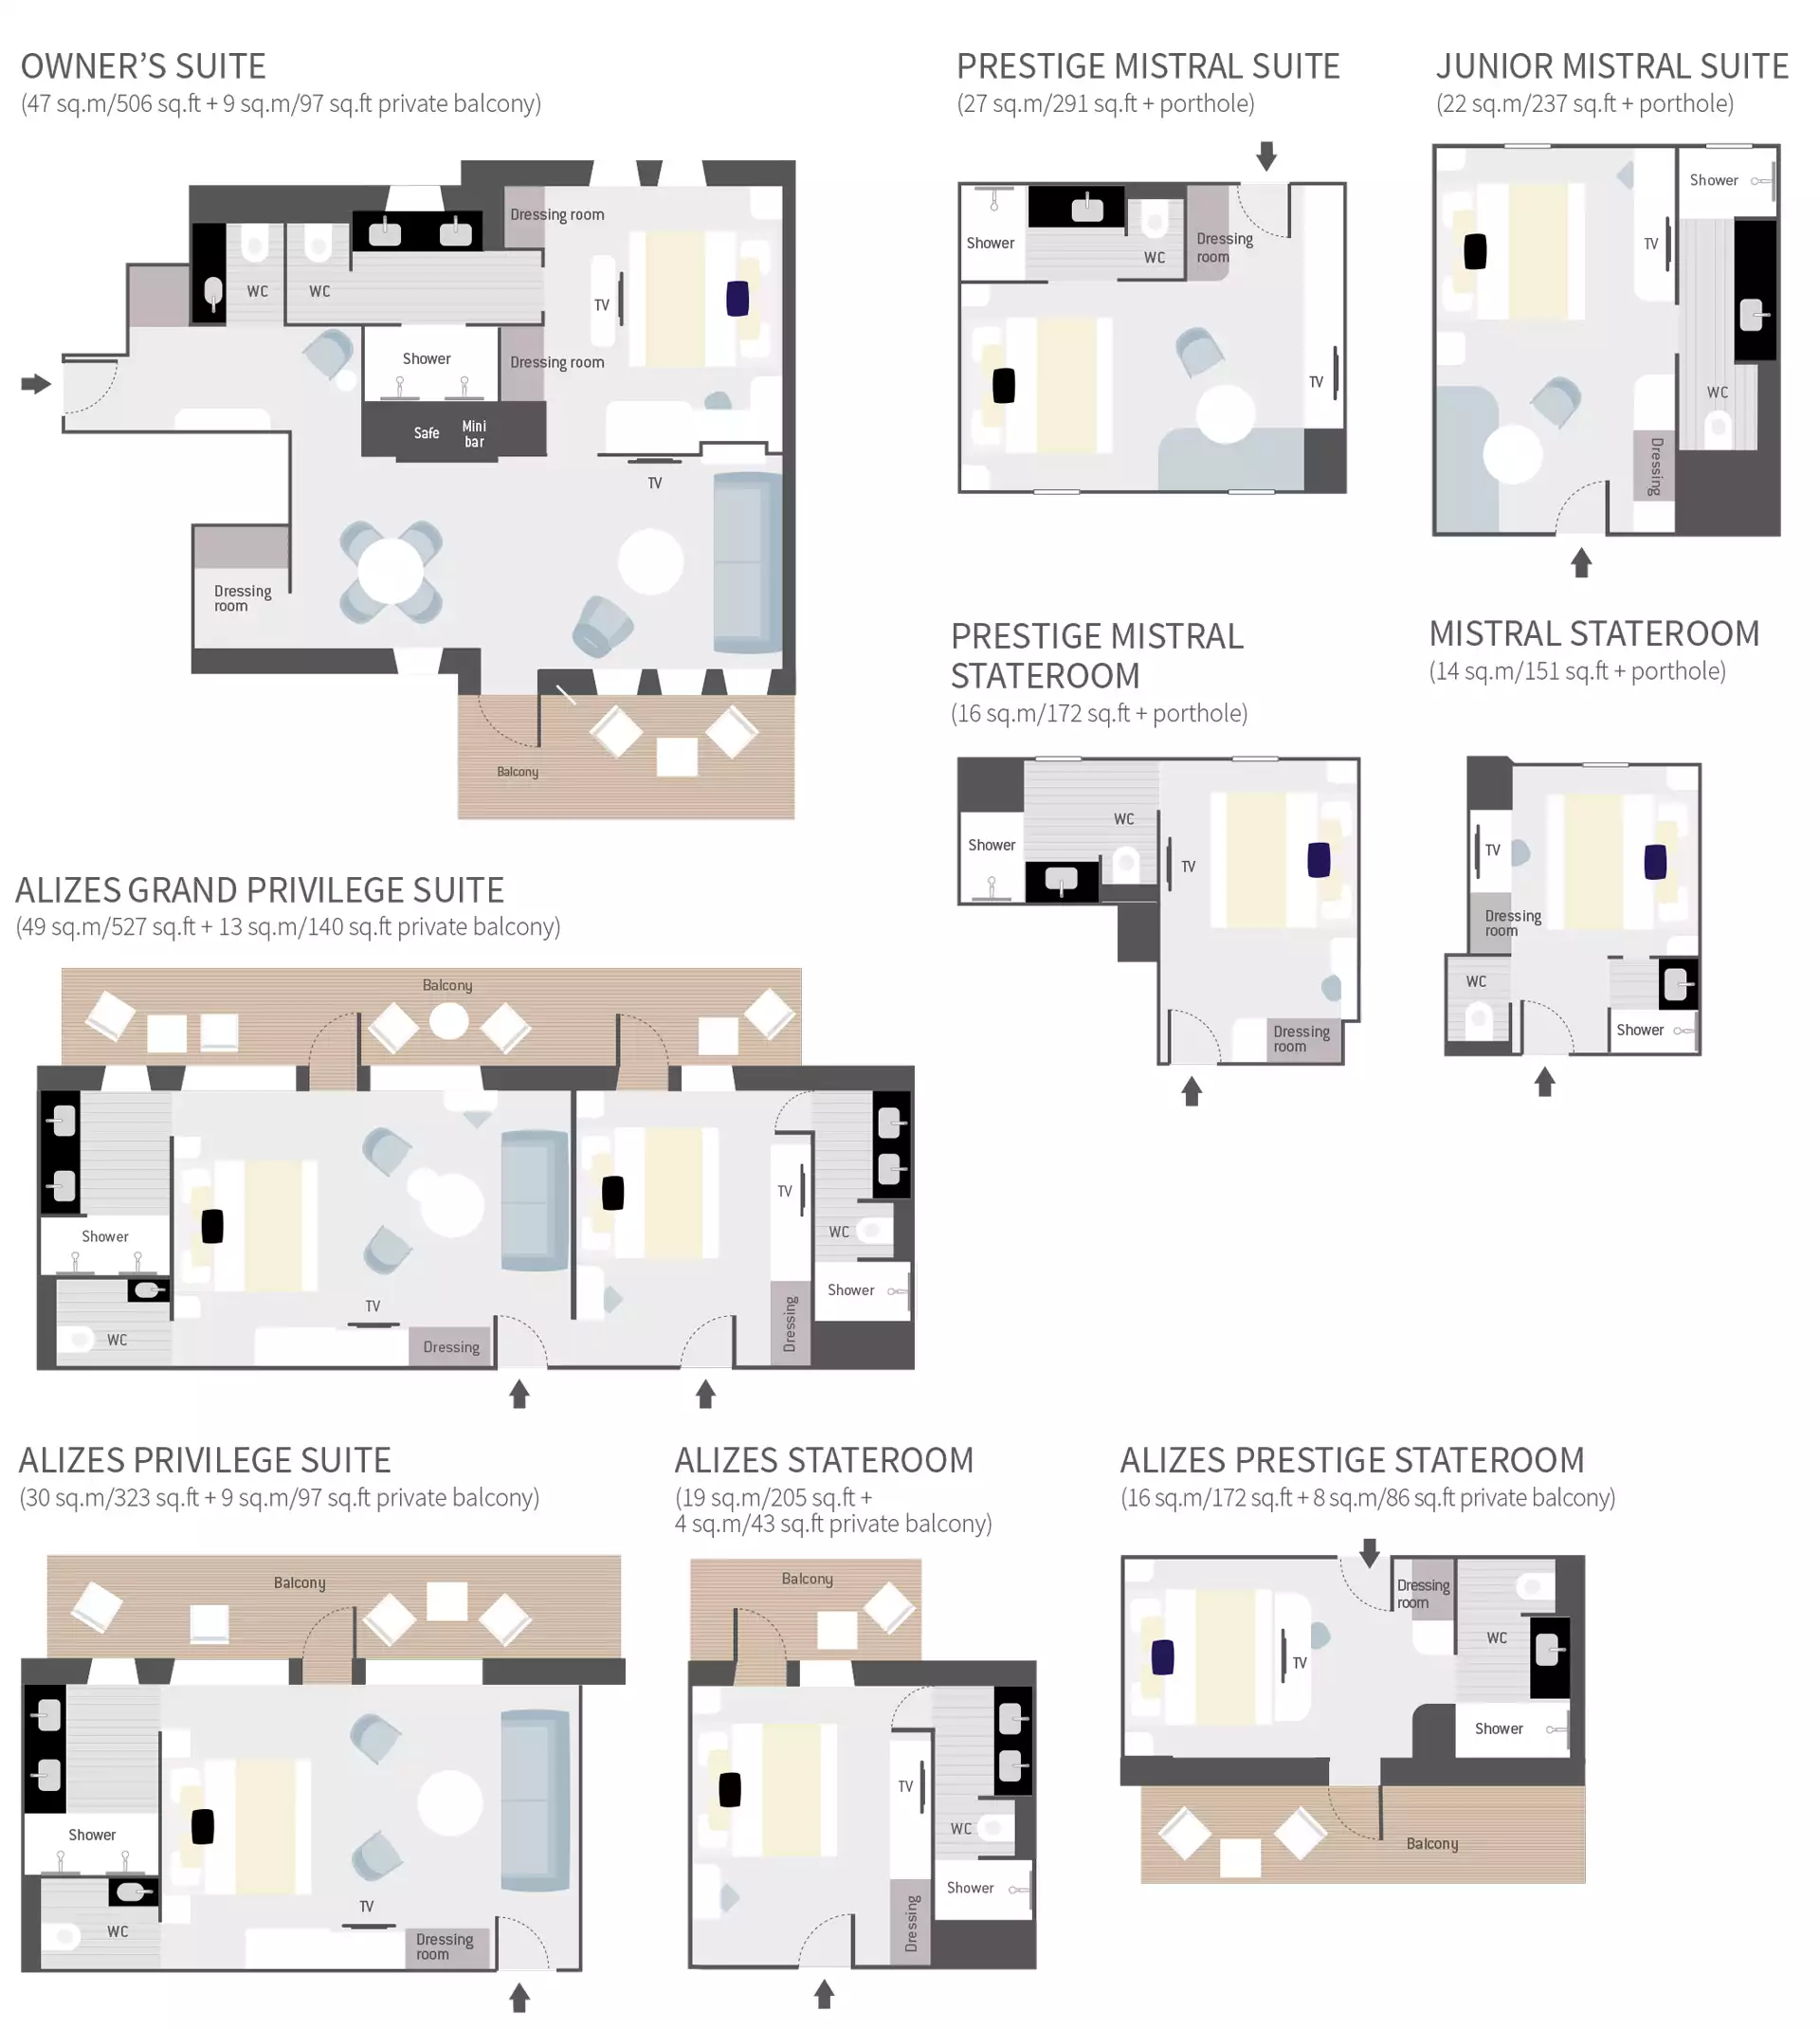 Overhead layout of 9 cabin categories showing placement of beds, bathrooms & more on Le Ponant cruise ship.